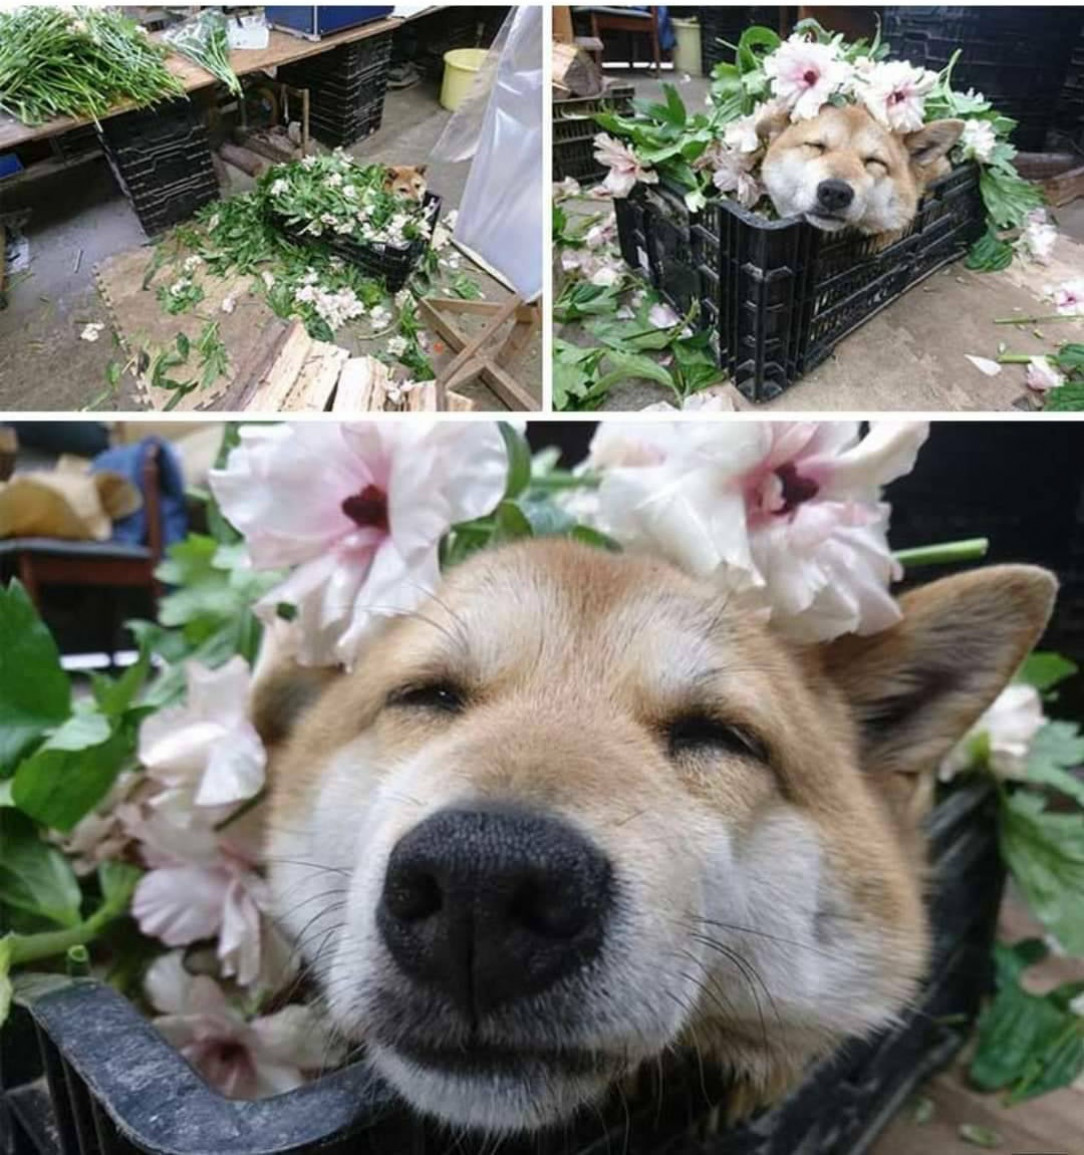 This flower shop has a flower assistant who just needed to take a break in the bed of flowers